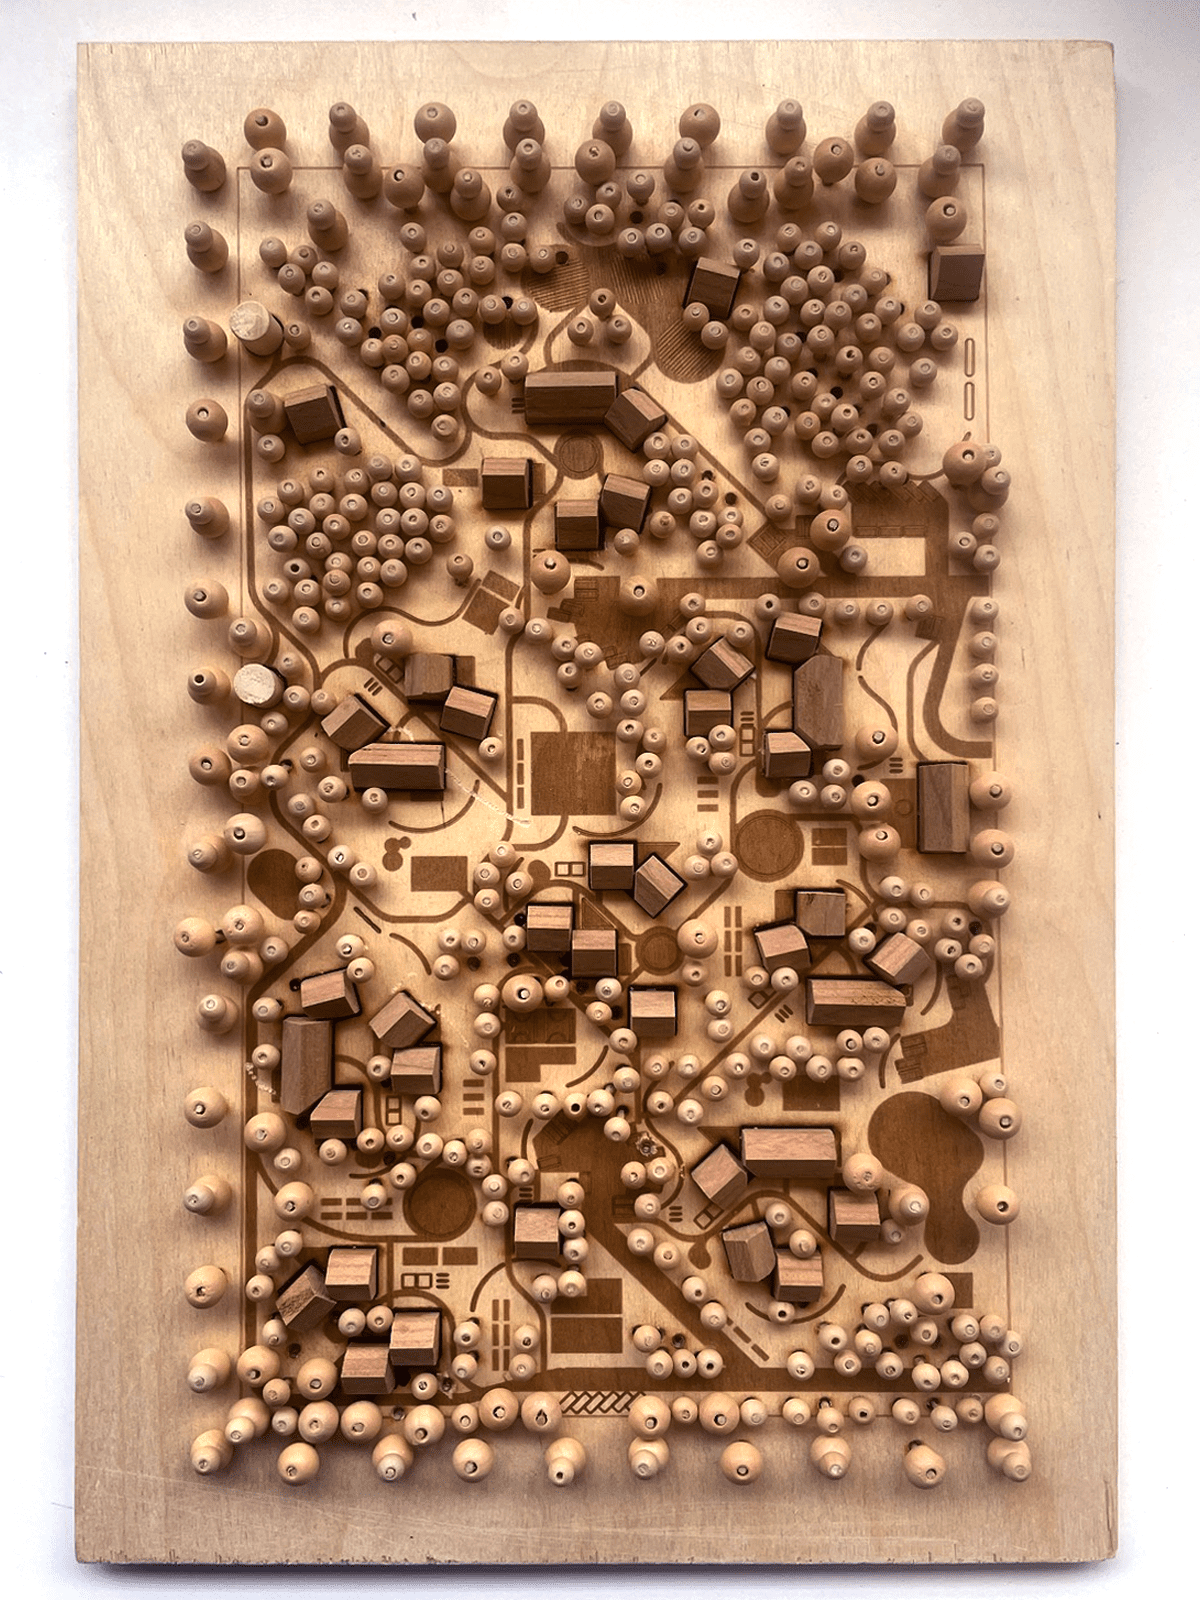 Full model CNC on wood of architecture project